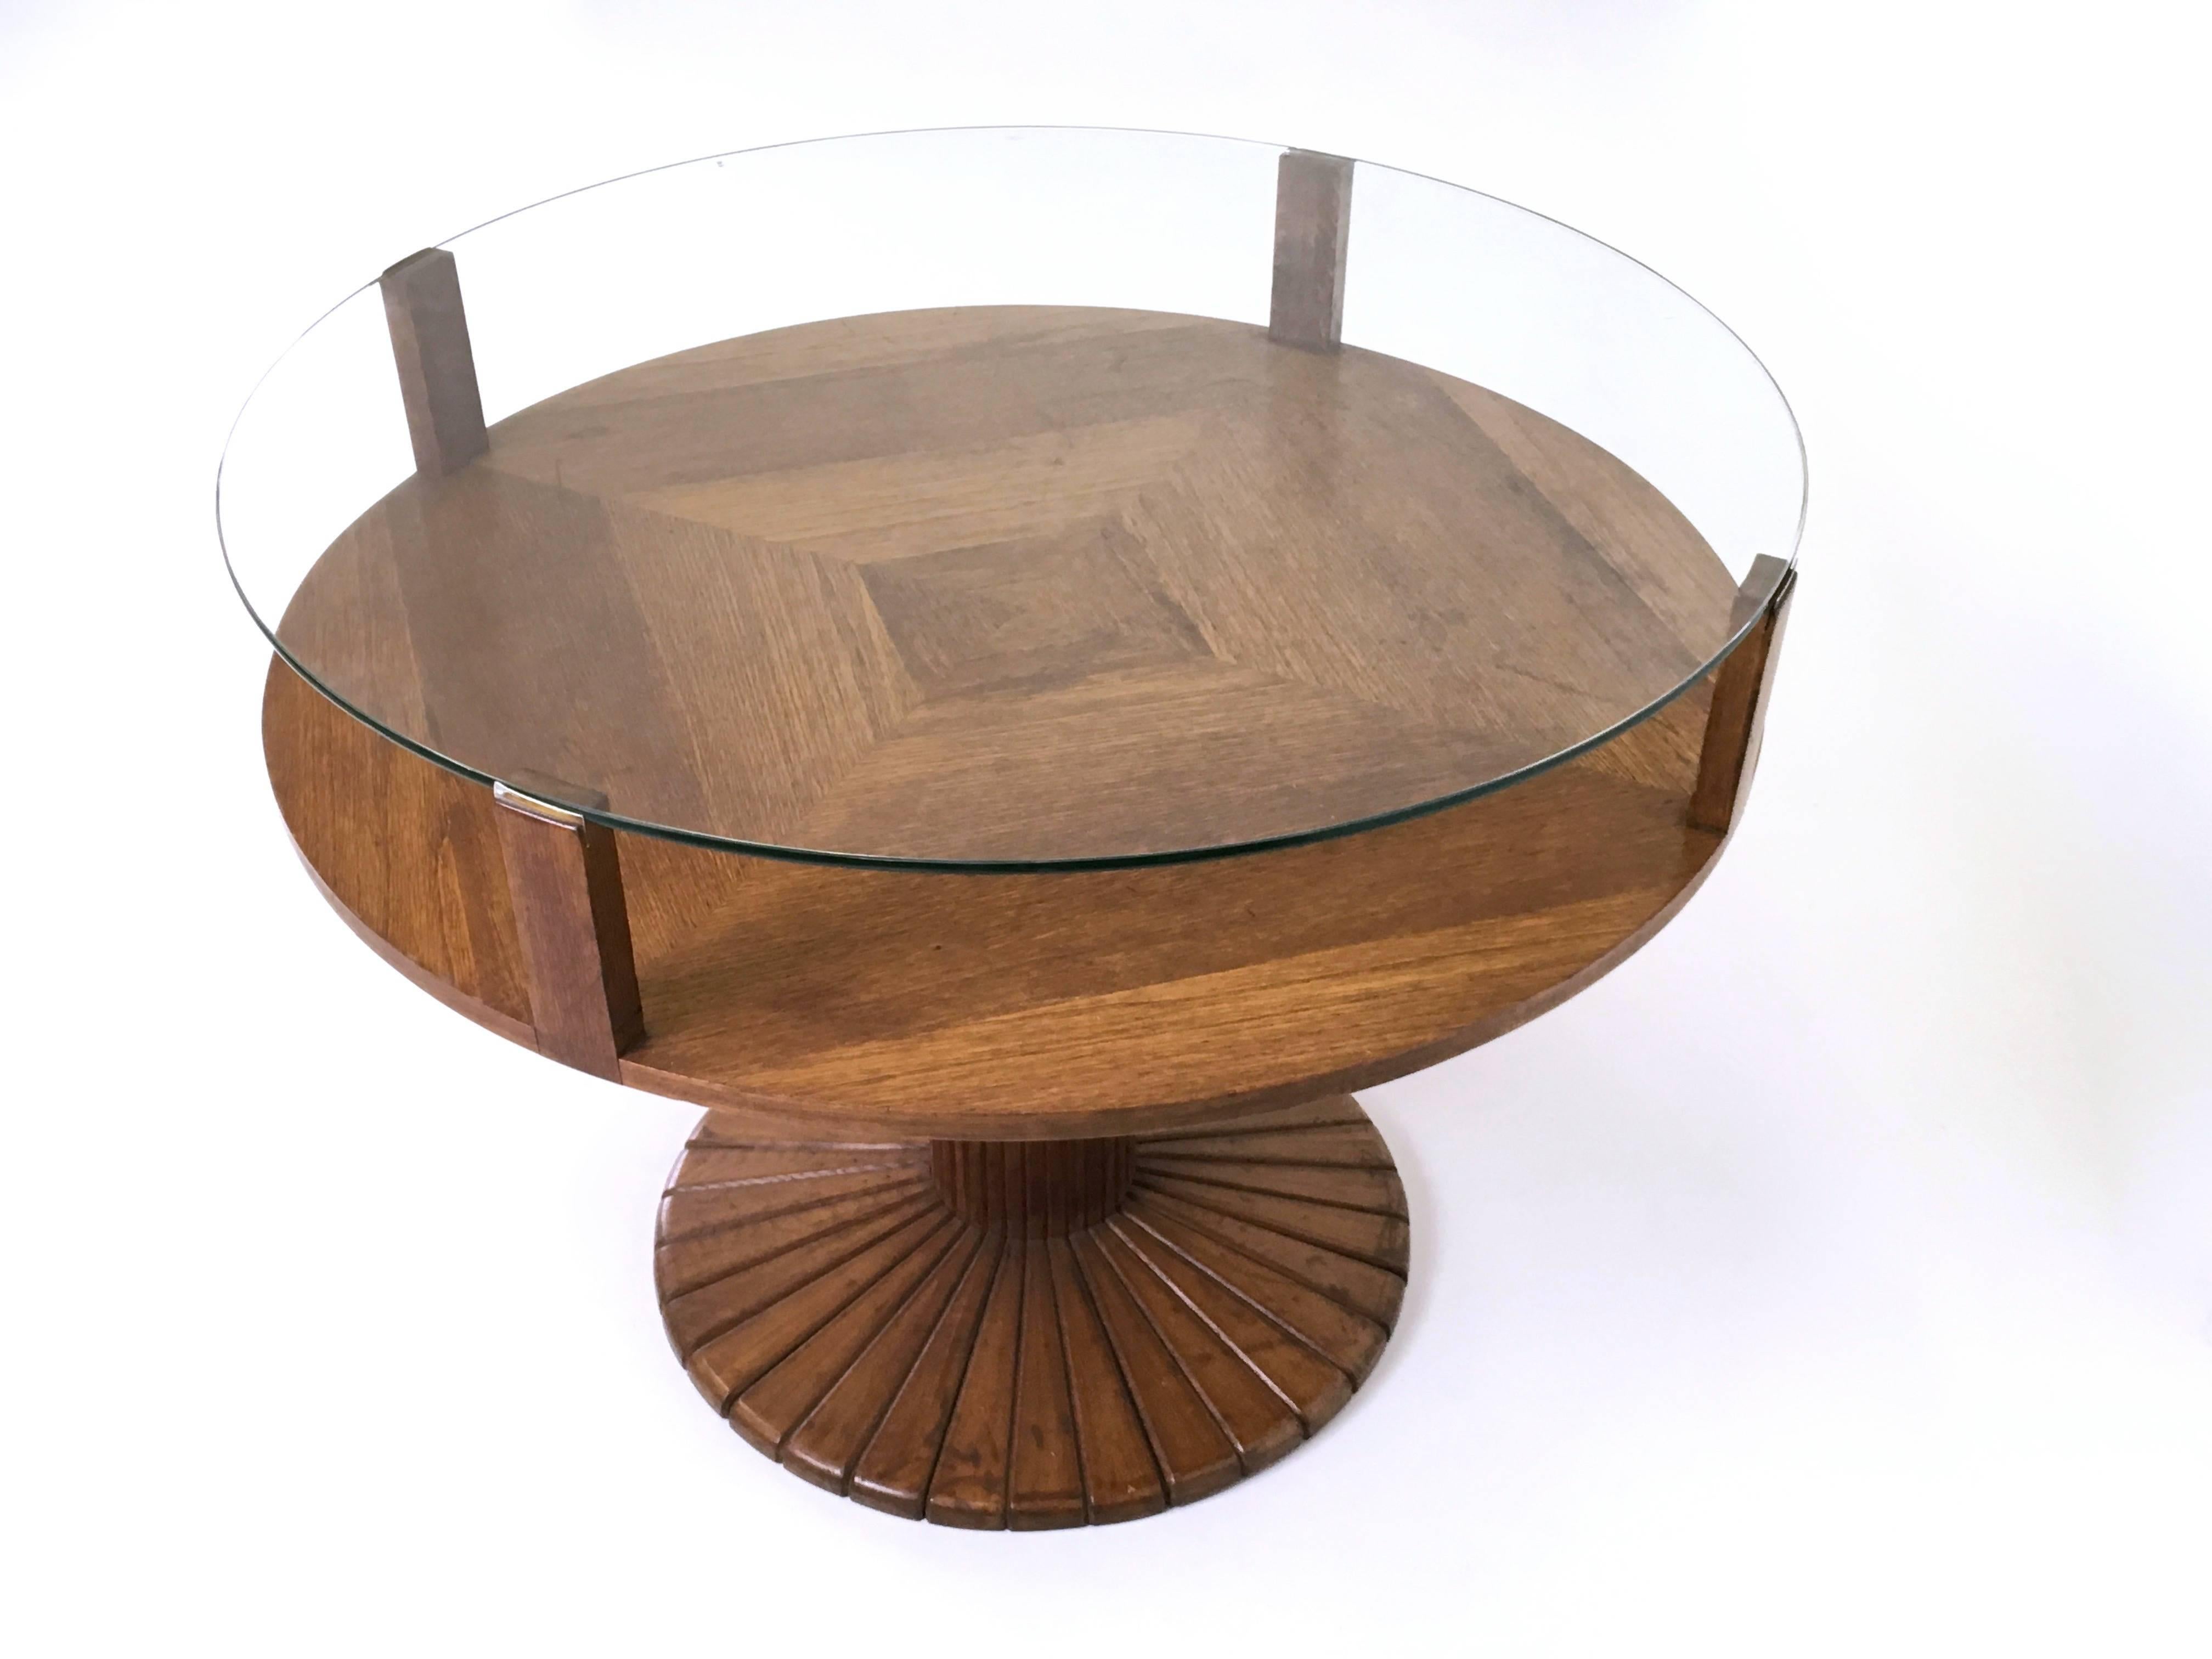 Ascribable to Osvaldo Borsani.
Made from oak with a tempered glass top.
In very good condition.